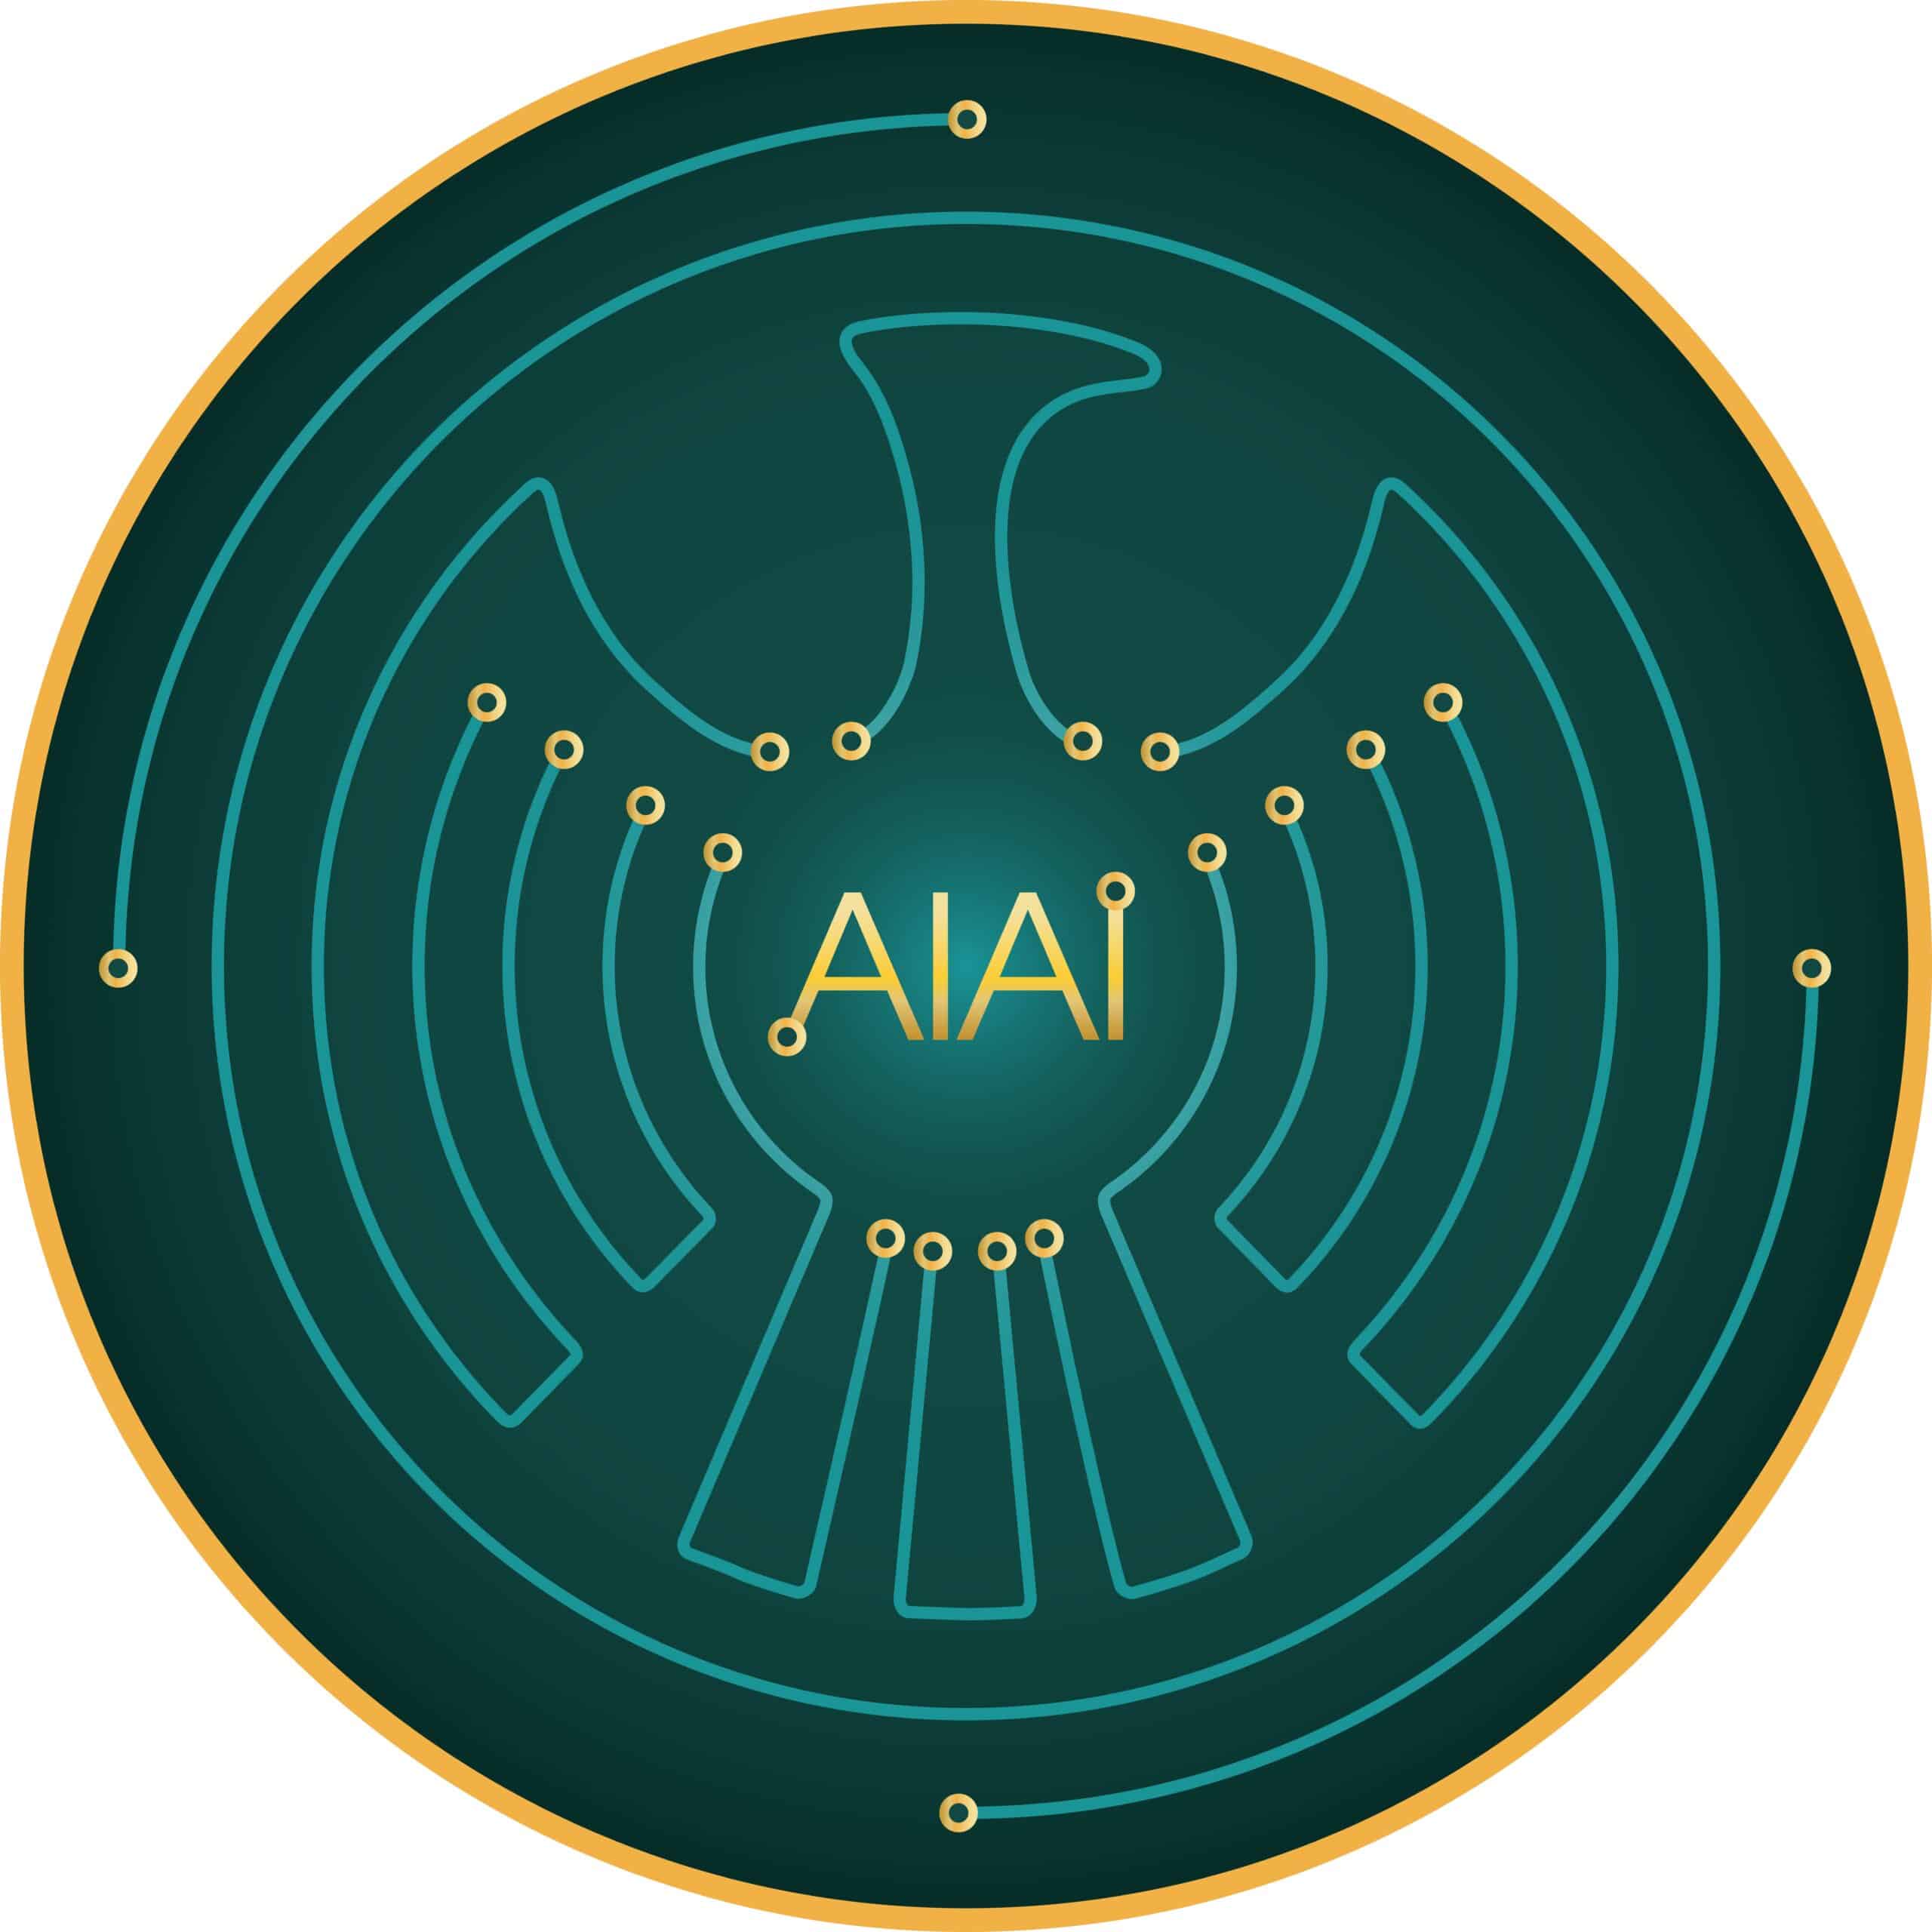 Earn a Certificate in Artistic Indigenization of Artificial Intelligence (AIAI) at the Institute of American Indian Arts (IAIA)